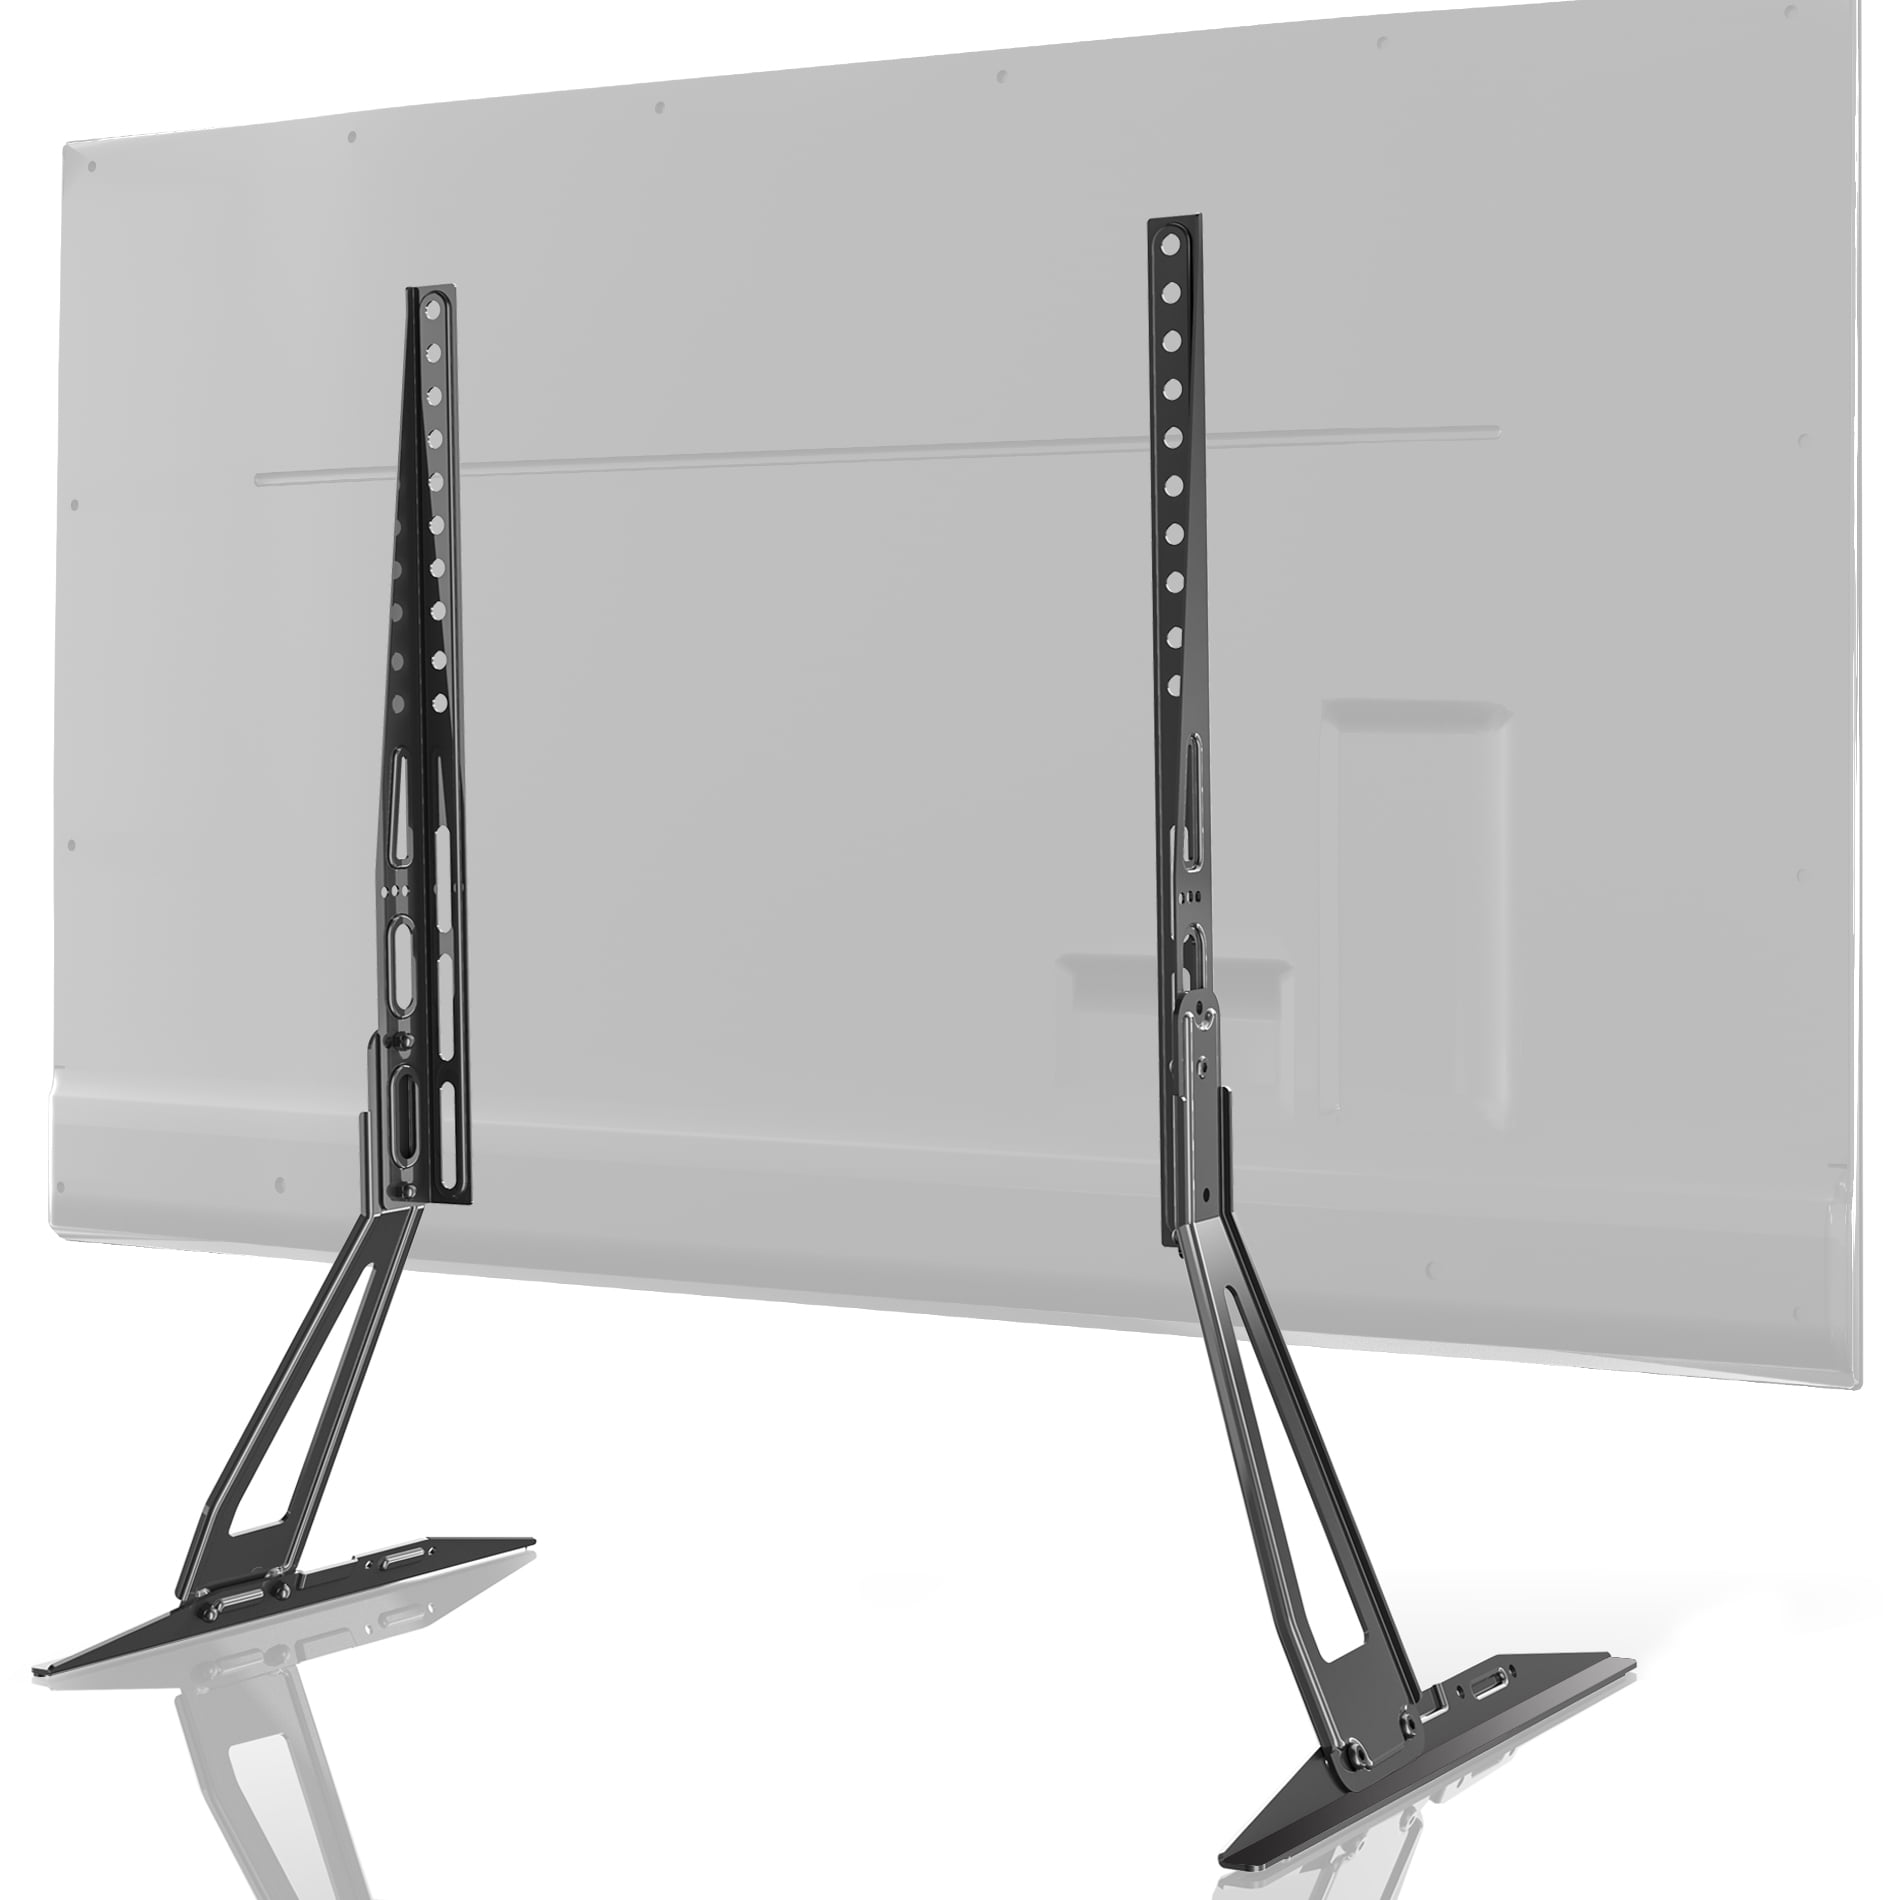 FITUEYES Table TV Pedestal Stand for 23-60 Inch LCD LED TV TT07201MB 